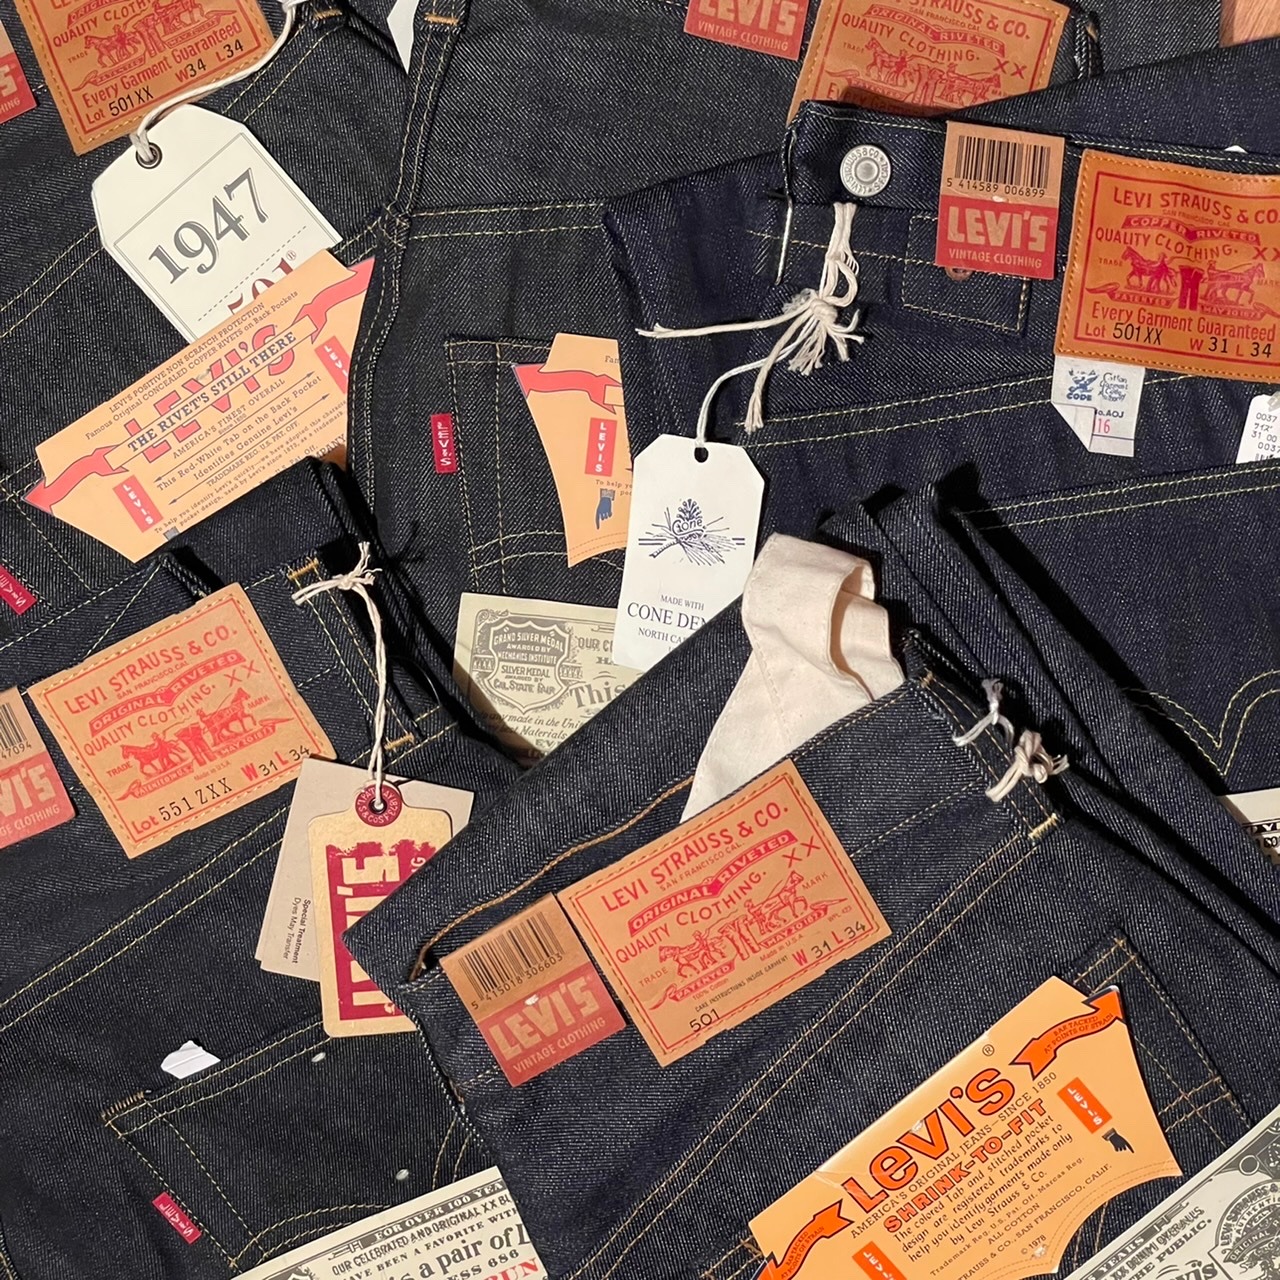 Levi's Vintage Clothing | Room Style Store